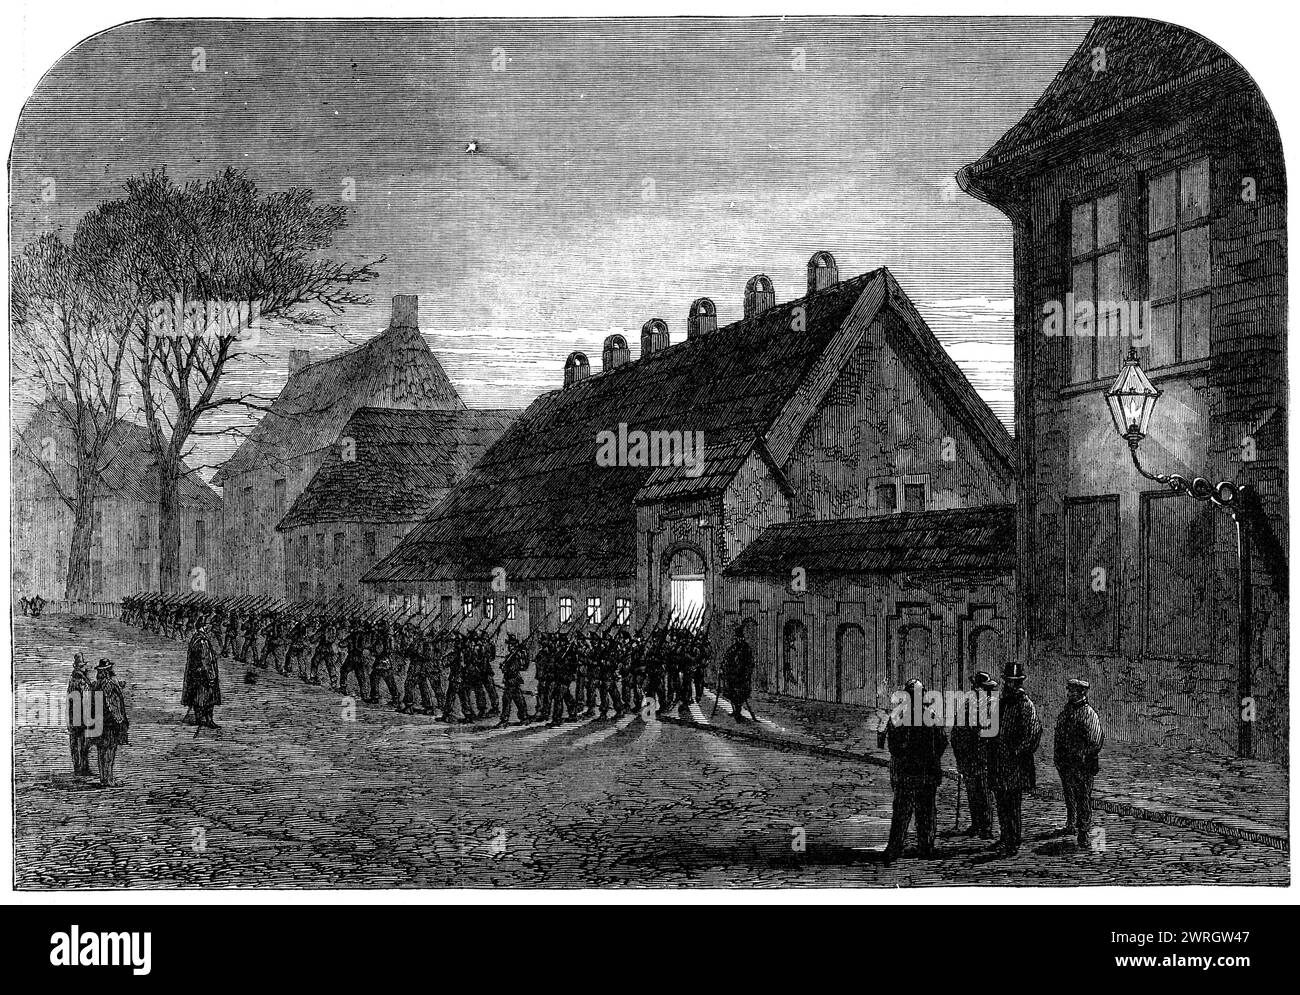 The Schleswig-Holstein Difficulty: the Danish troops leaving the Mint in Altona before daybreak, 1864. 'The correspondent of one of our contemporaries writes...in a letter dated Altona, Dec. 25: &quot;As I told you in my last, the &quot;execution&quot; [ie regime change] has been put in. The German Diet has made its levy, and &quot;seized&quot; Holstein - or at least the capital of it. Altona is in the hands of the military brokers, ready either to be &quot;bought in&quot; or to be knocked down - by the Austrian and Prussian artillery - should the Prince of Augustenburg be rash enough to &quot Stock Photo